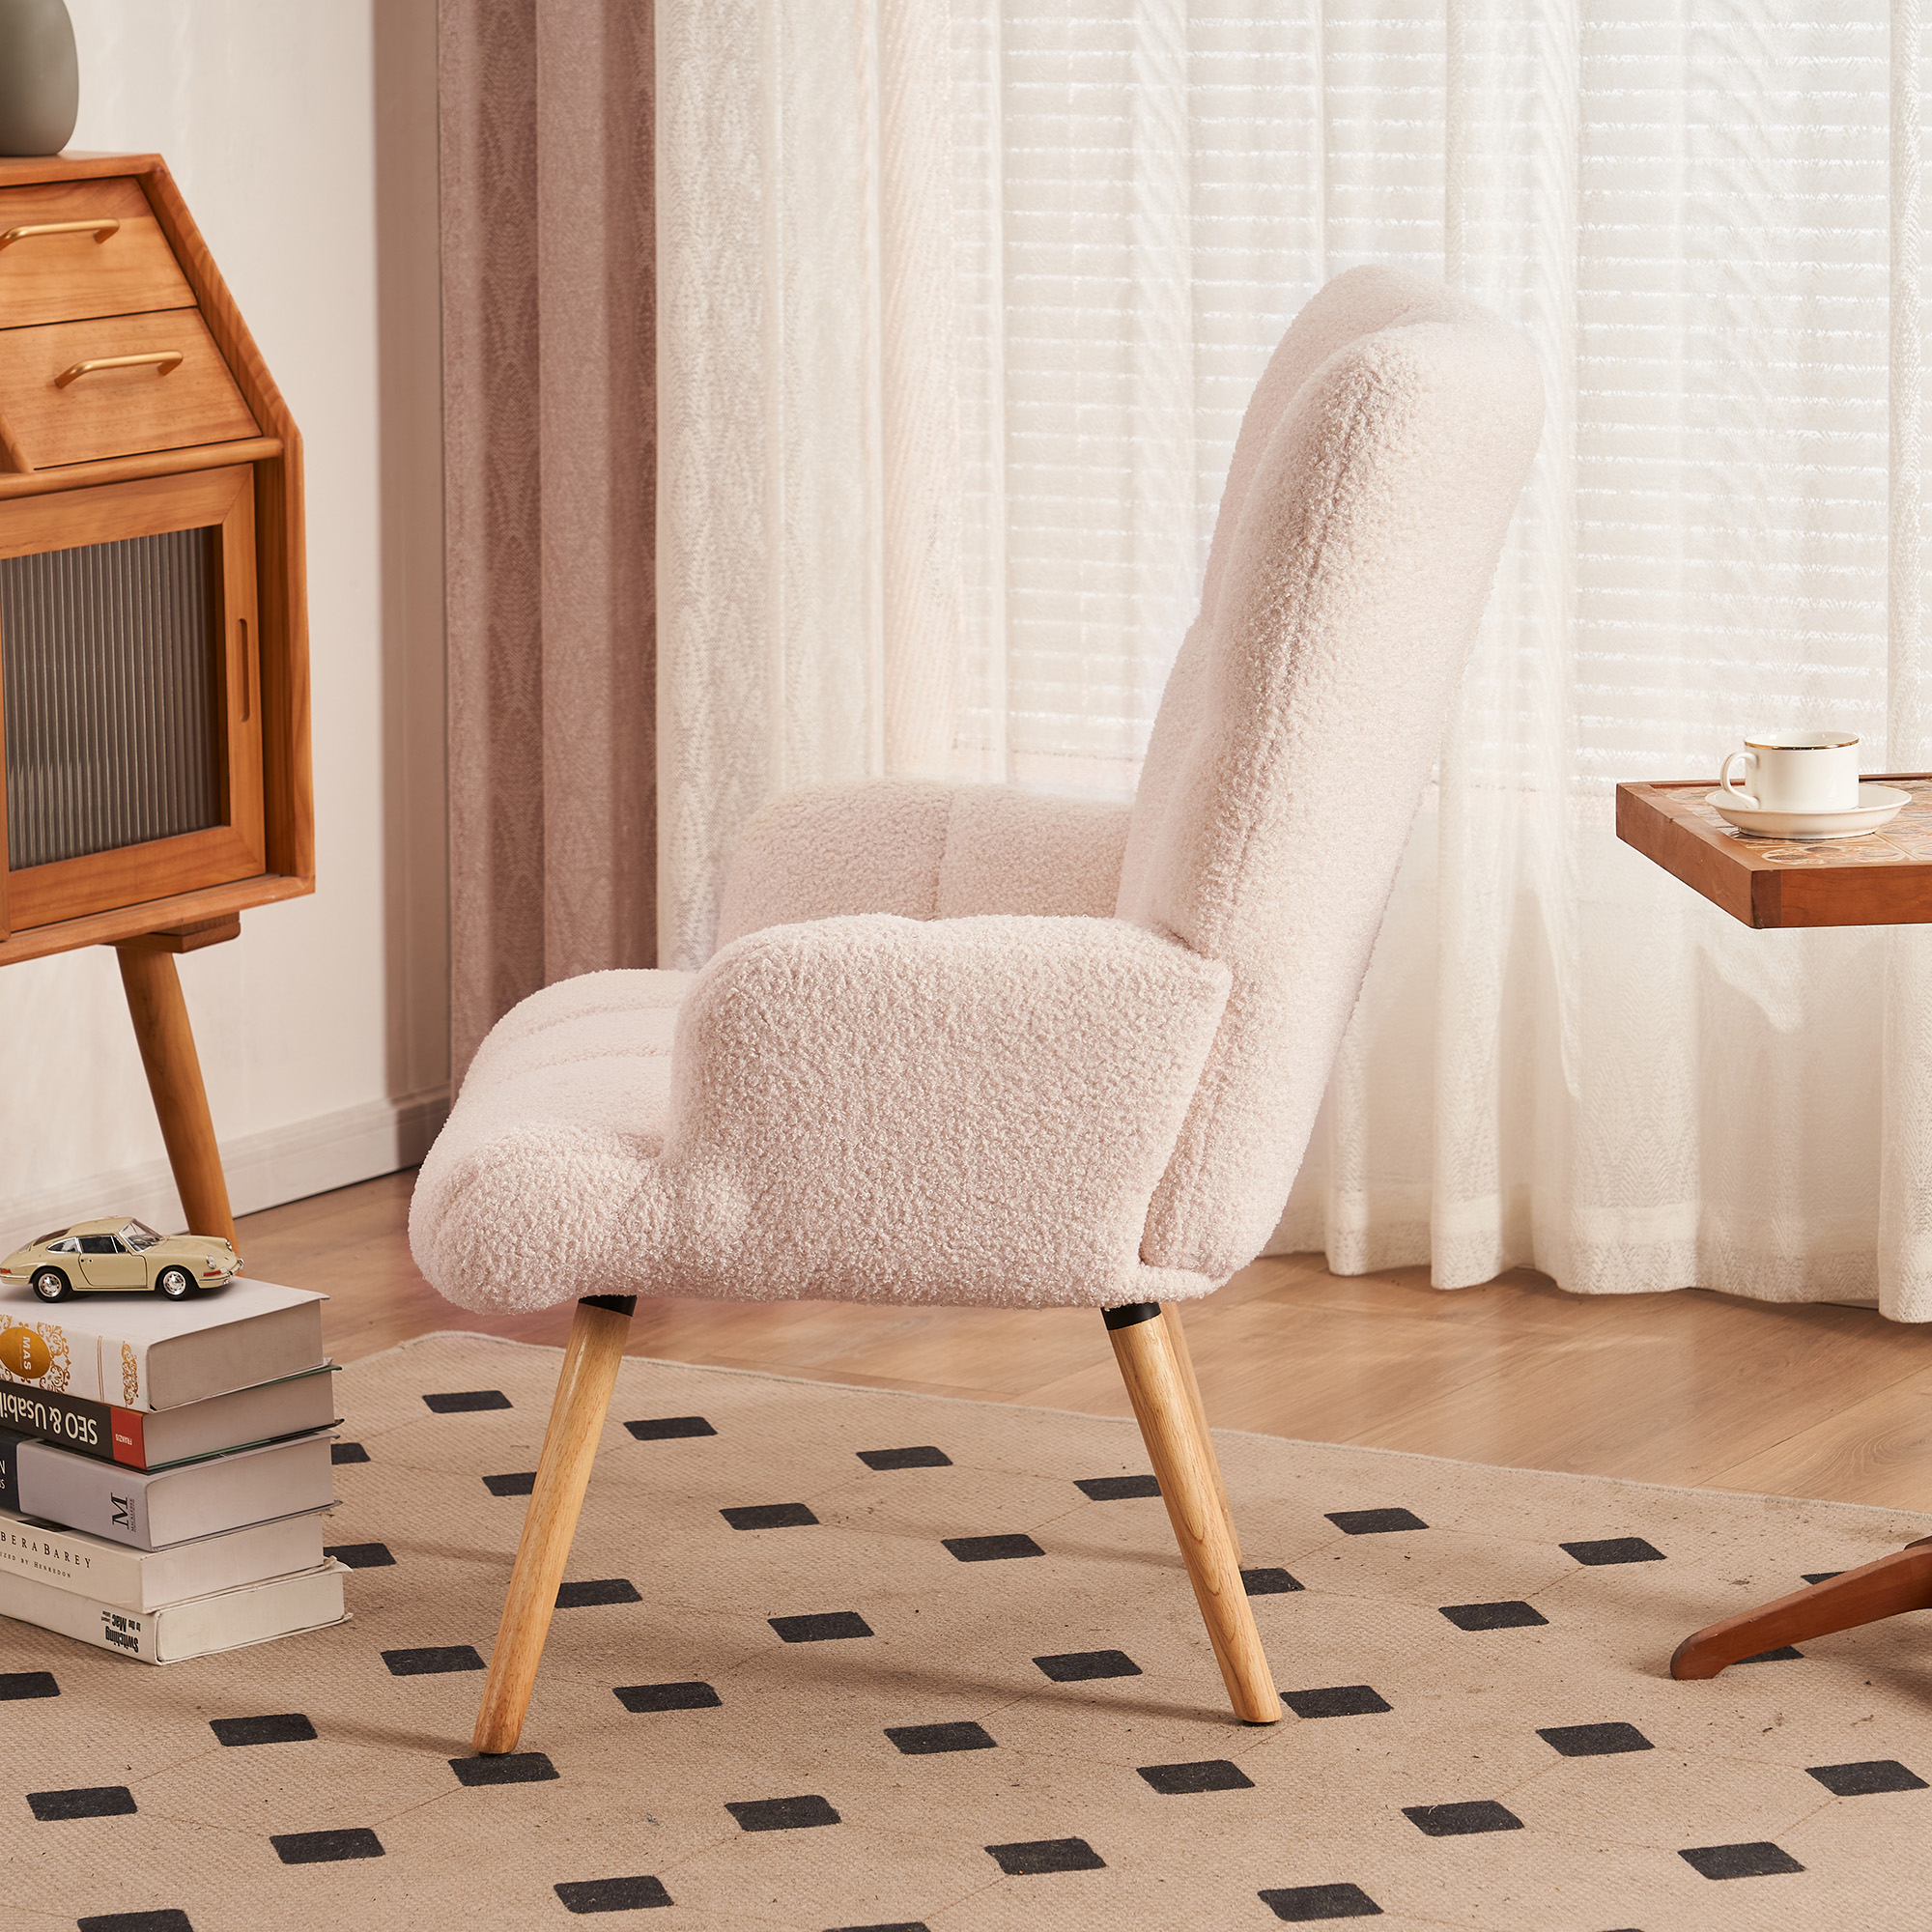 Teddy Velvet Accent Chair, Teddy Furry Casual Chair With High Back And Soft Padded, Modern Armchair Chair - White